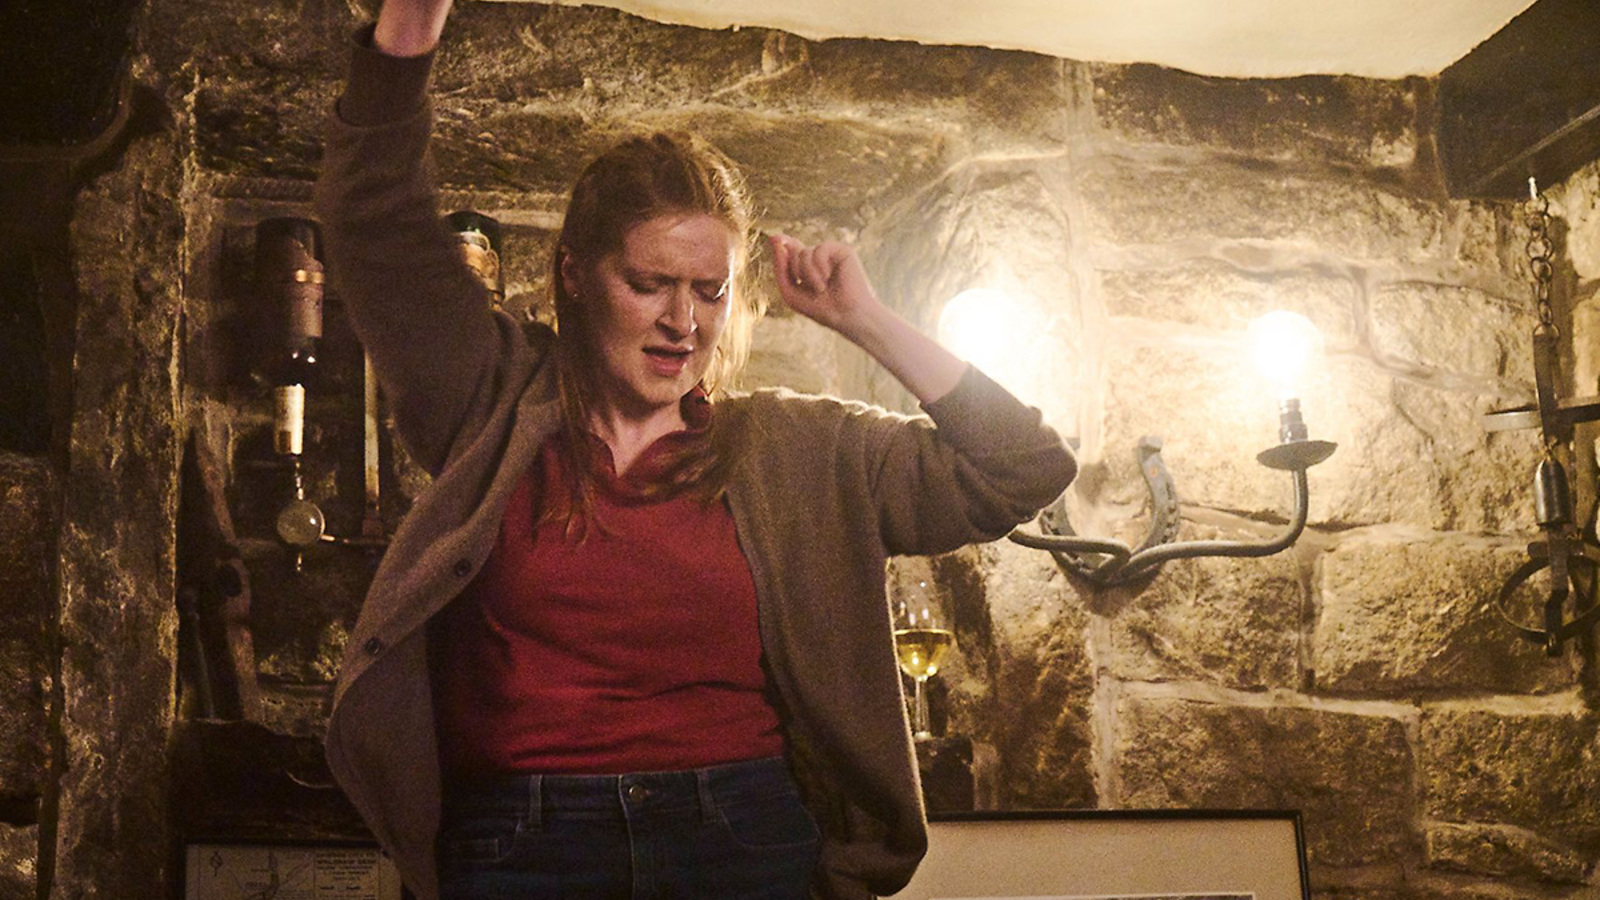 Annie dances in the pub in a scene from INCOMPATIBLE